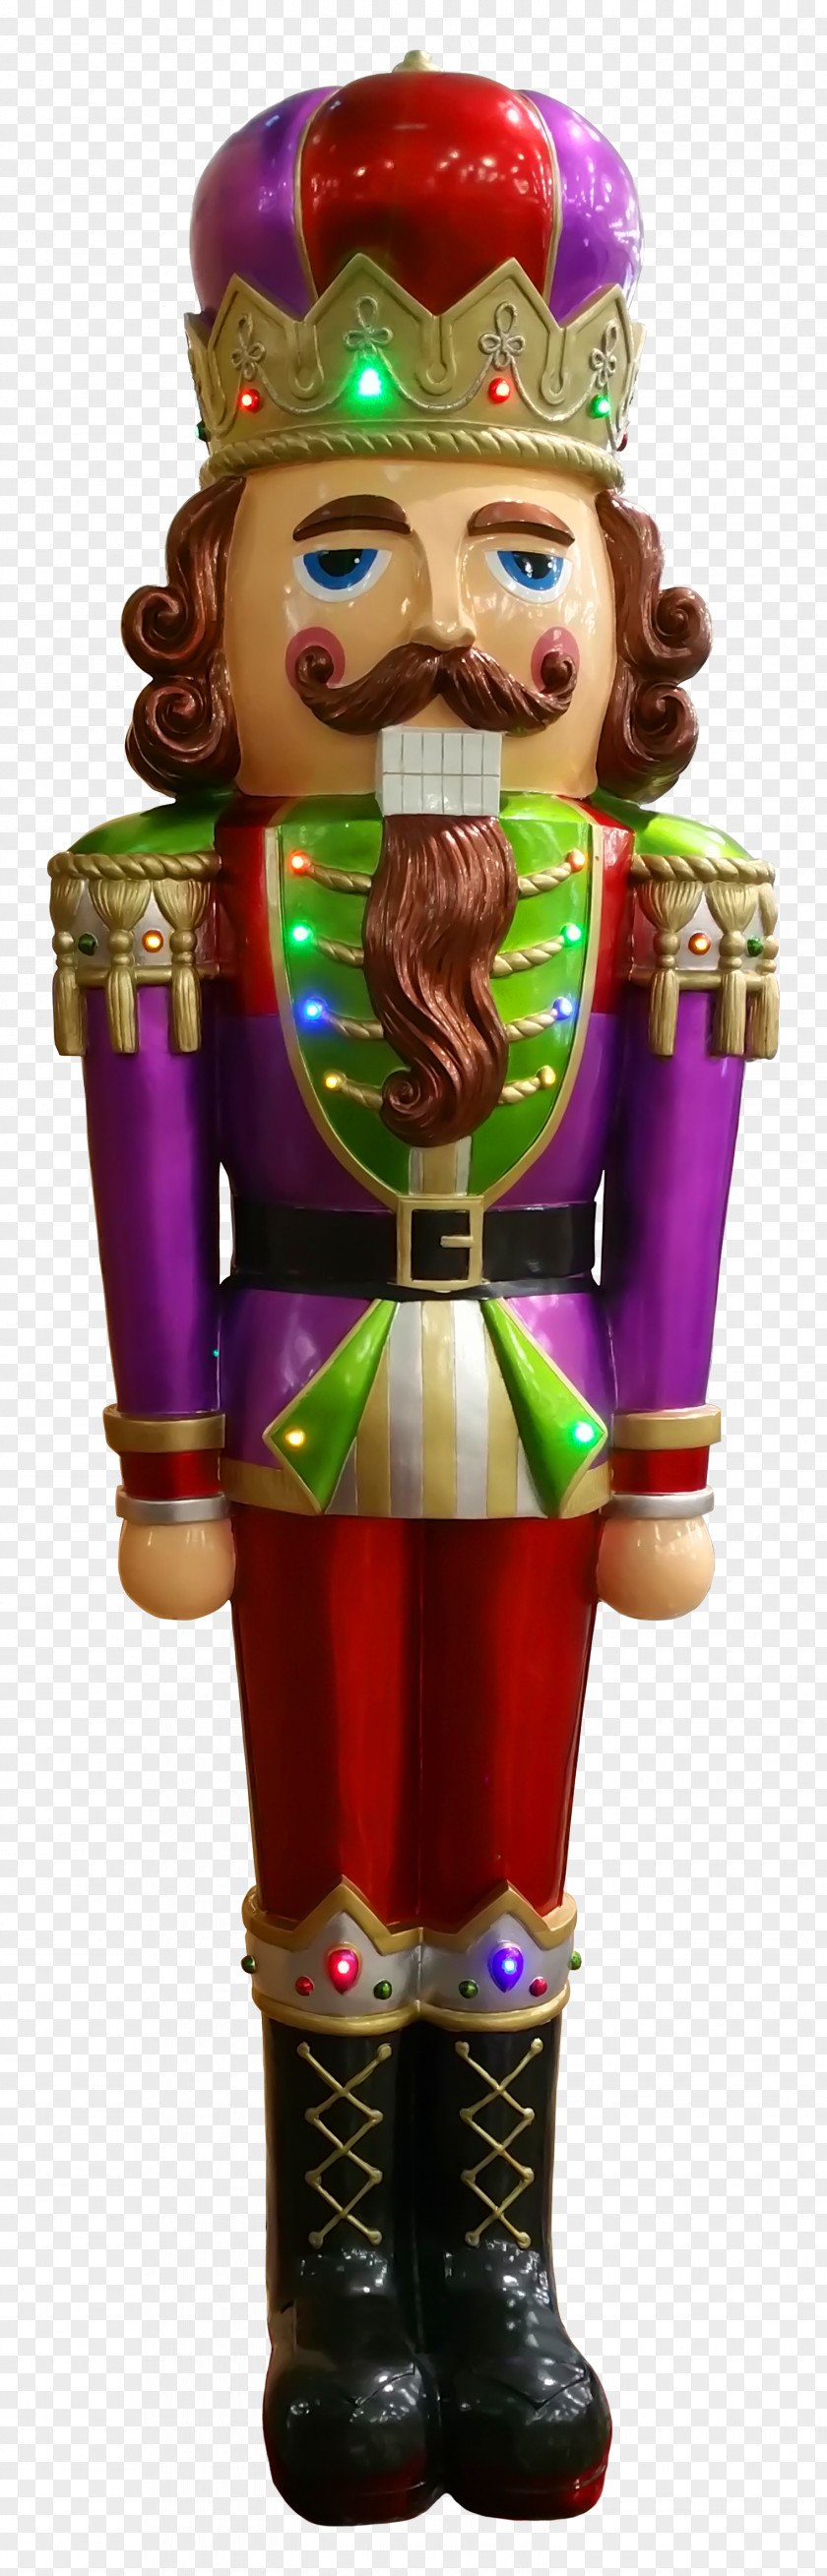 Christmas Nutcracker Doll Toy Soldier PNG